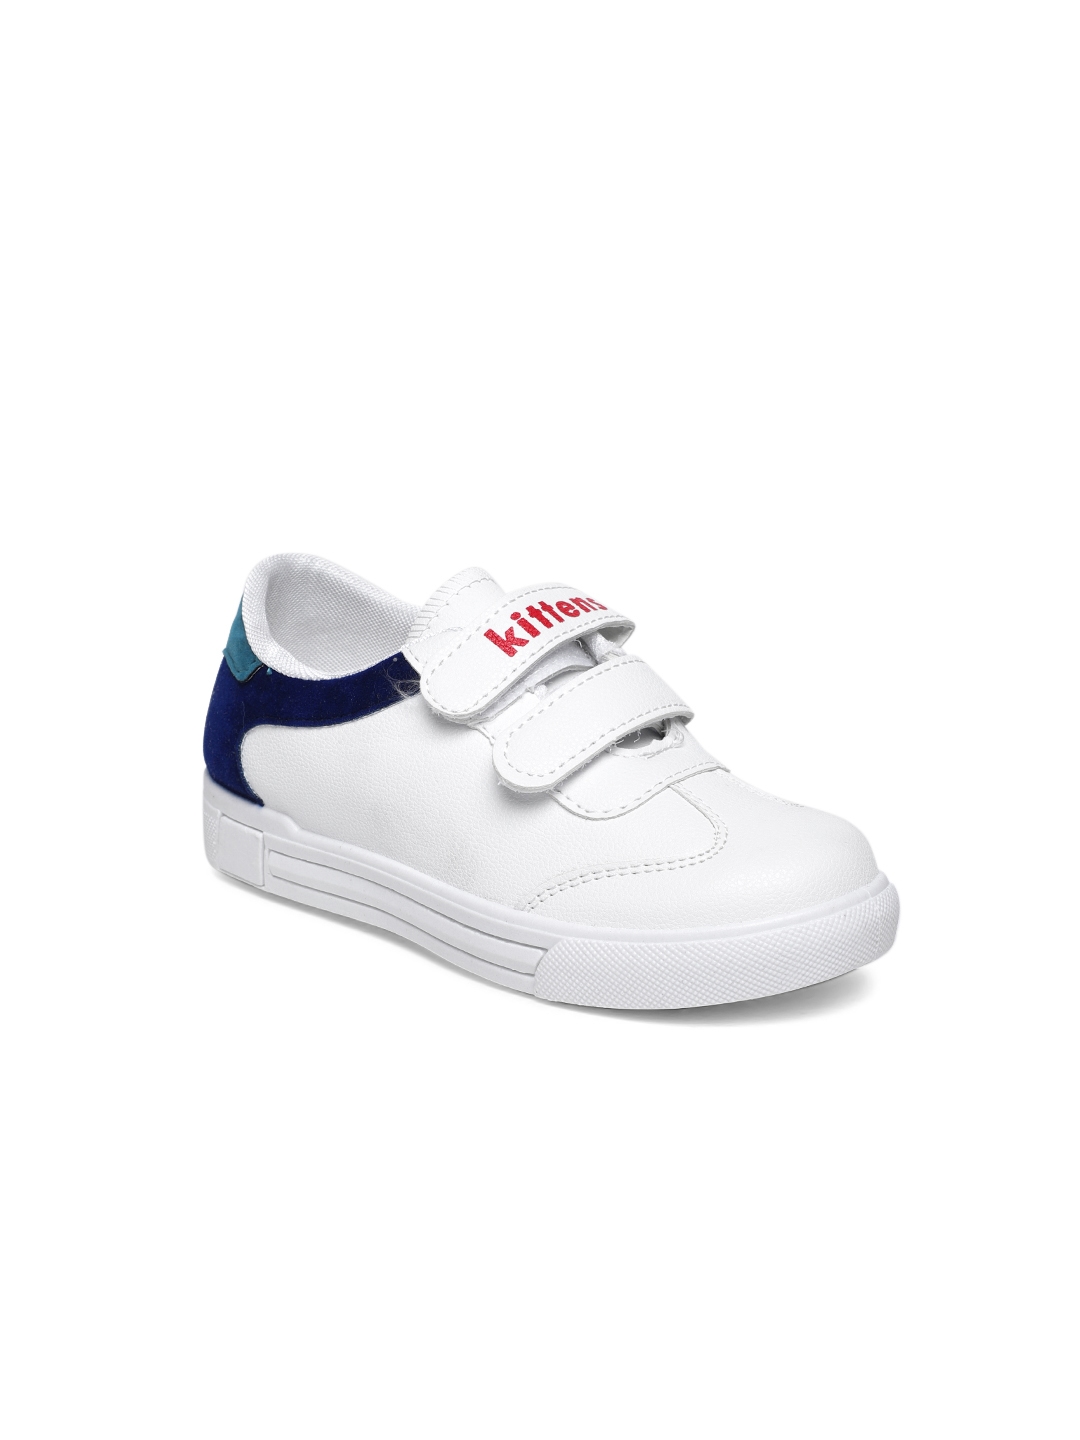 white sneakers for boys